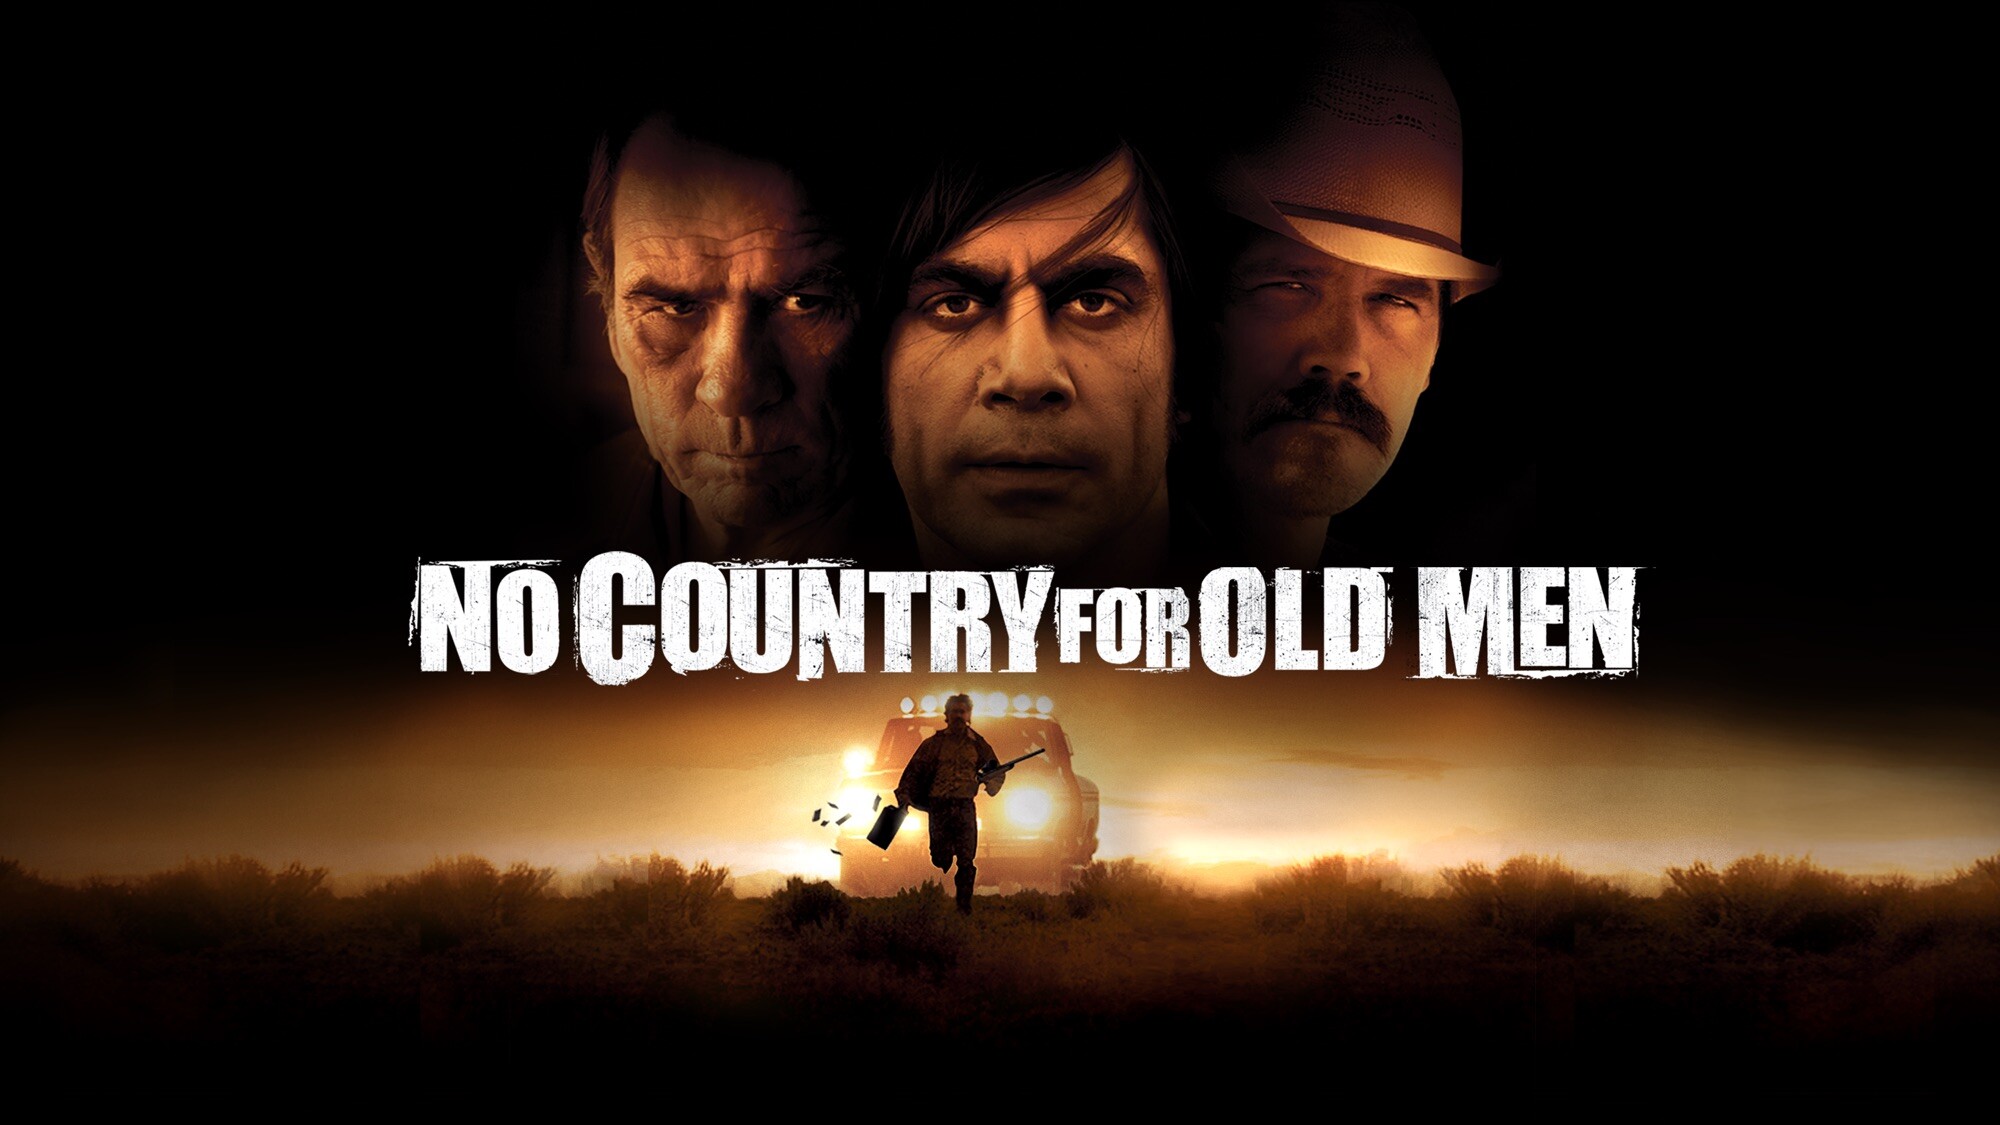 No Country For Old Men (Movie): Academy Award for Best Picture, Best Supporting Actor, Best Director and Best Adapted Screenplay. 2000x1130 HD Wallpaper.